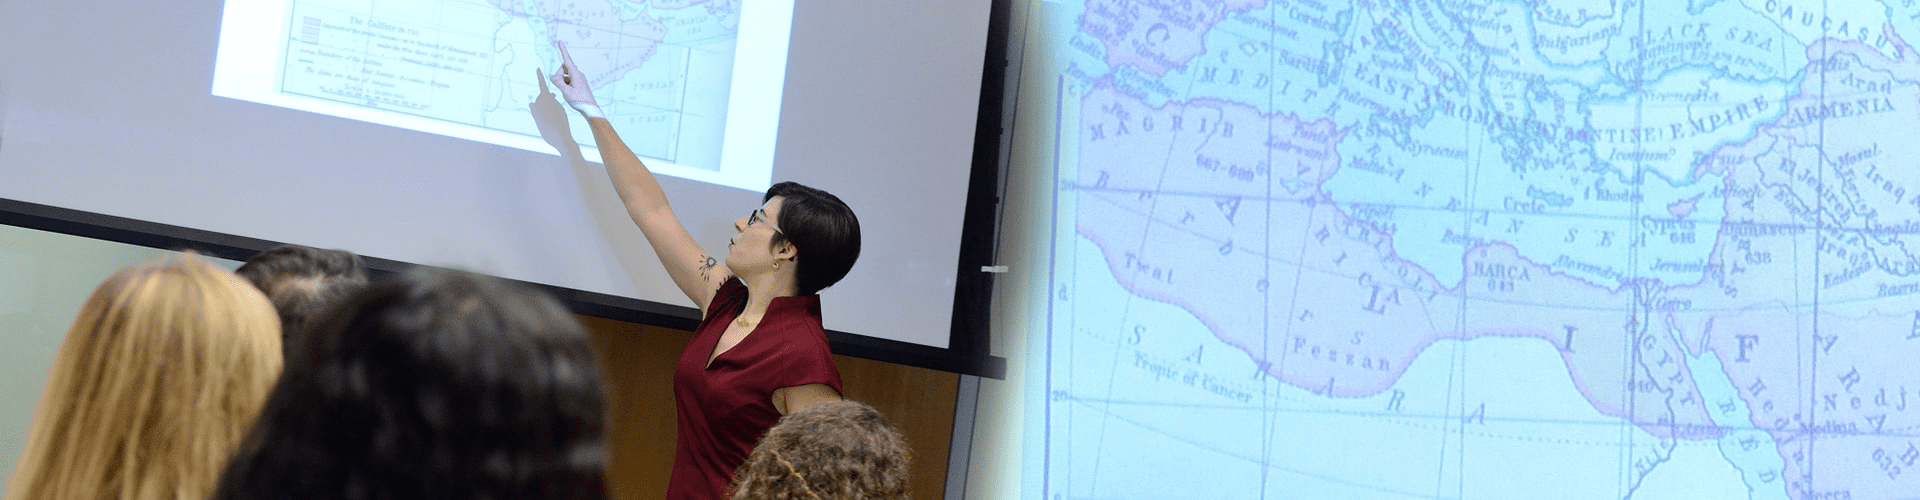 Faculty member pointing to a map projected on a screen